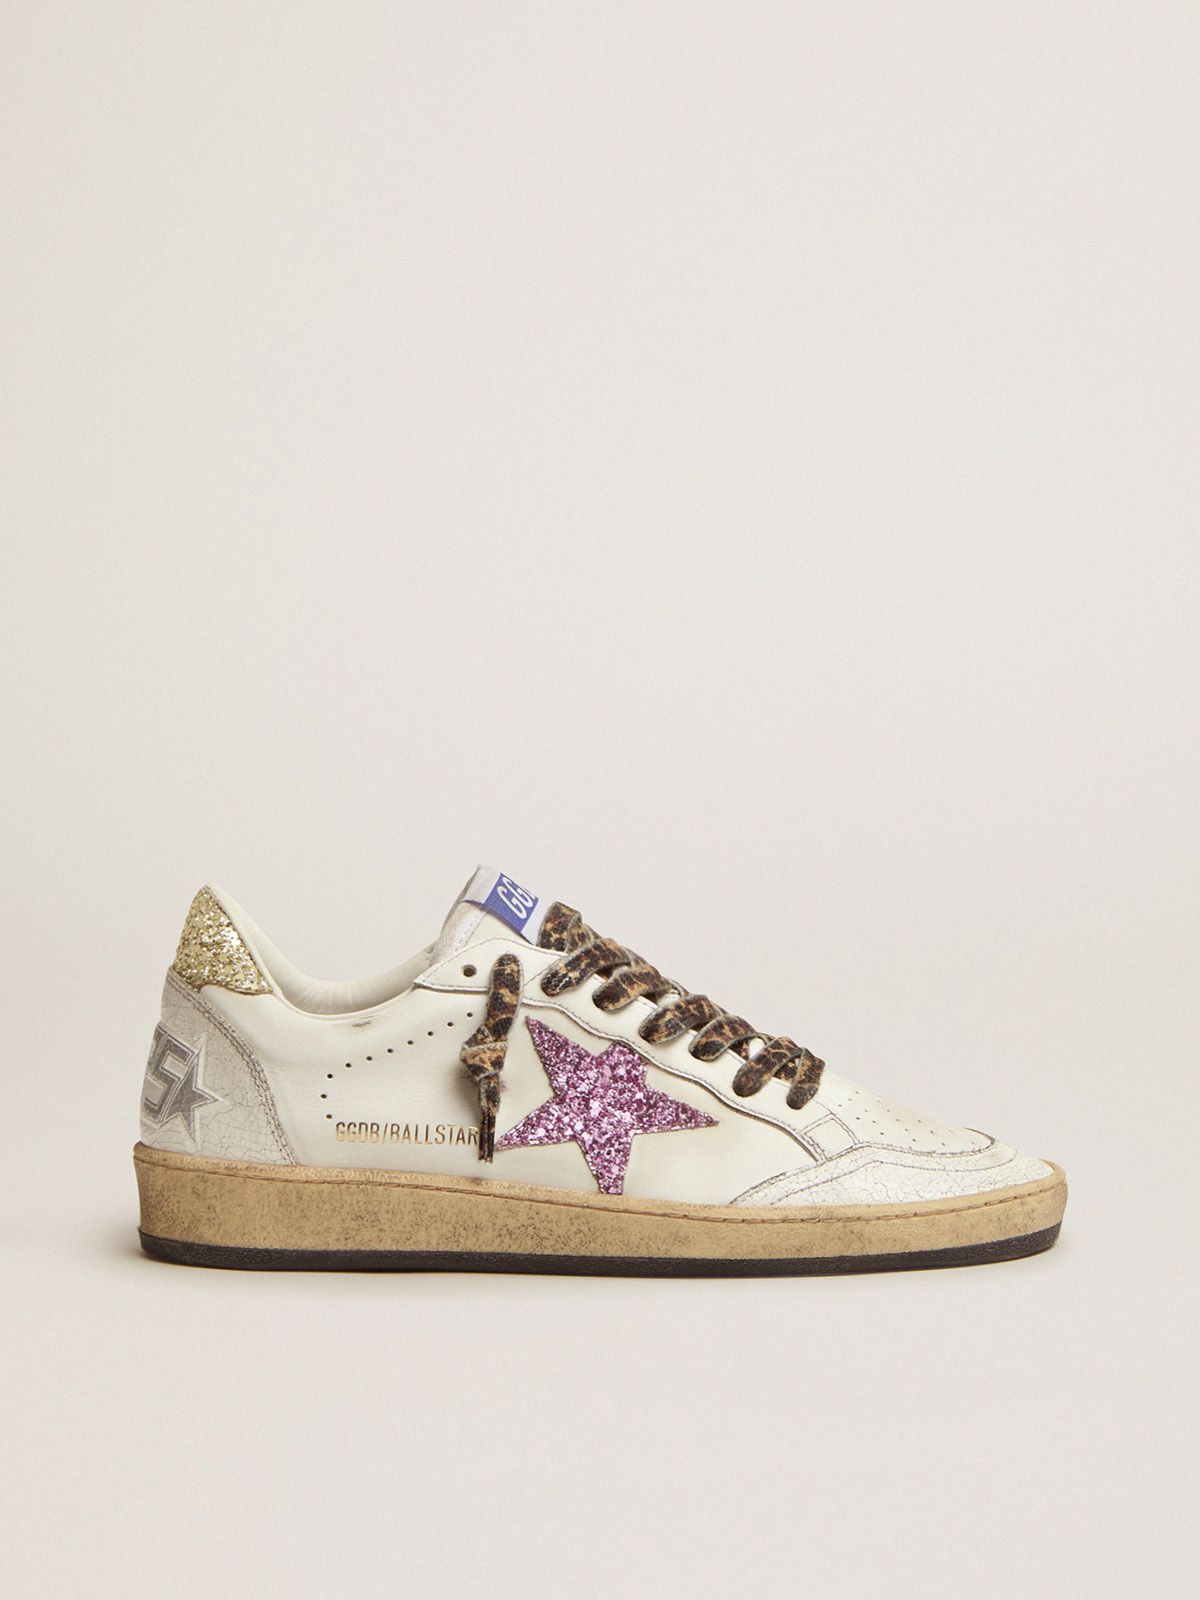 golden goose heel Ball and sneakers in white glitter star LTD tab leather Star with colored